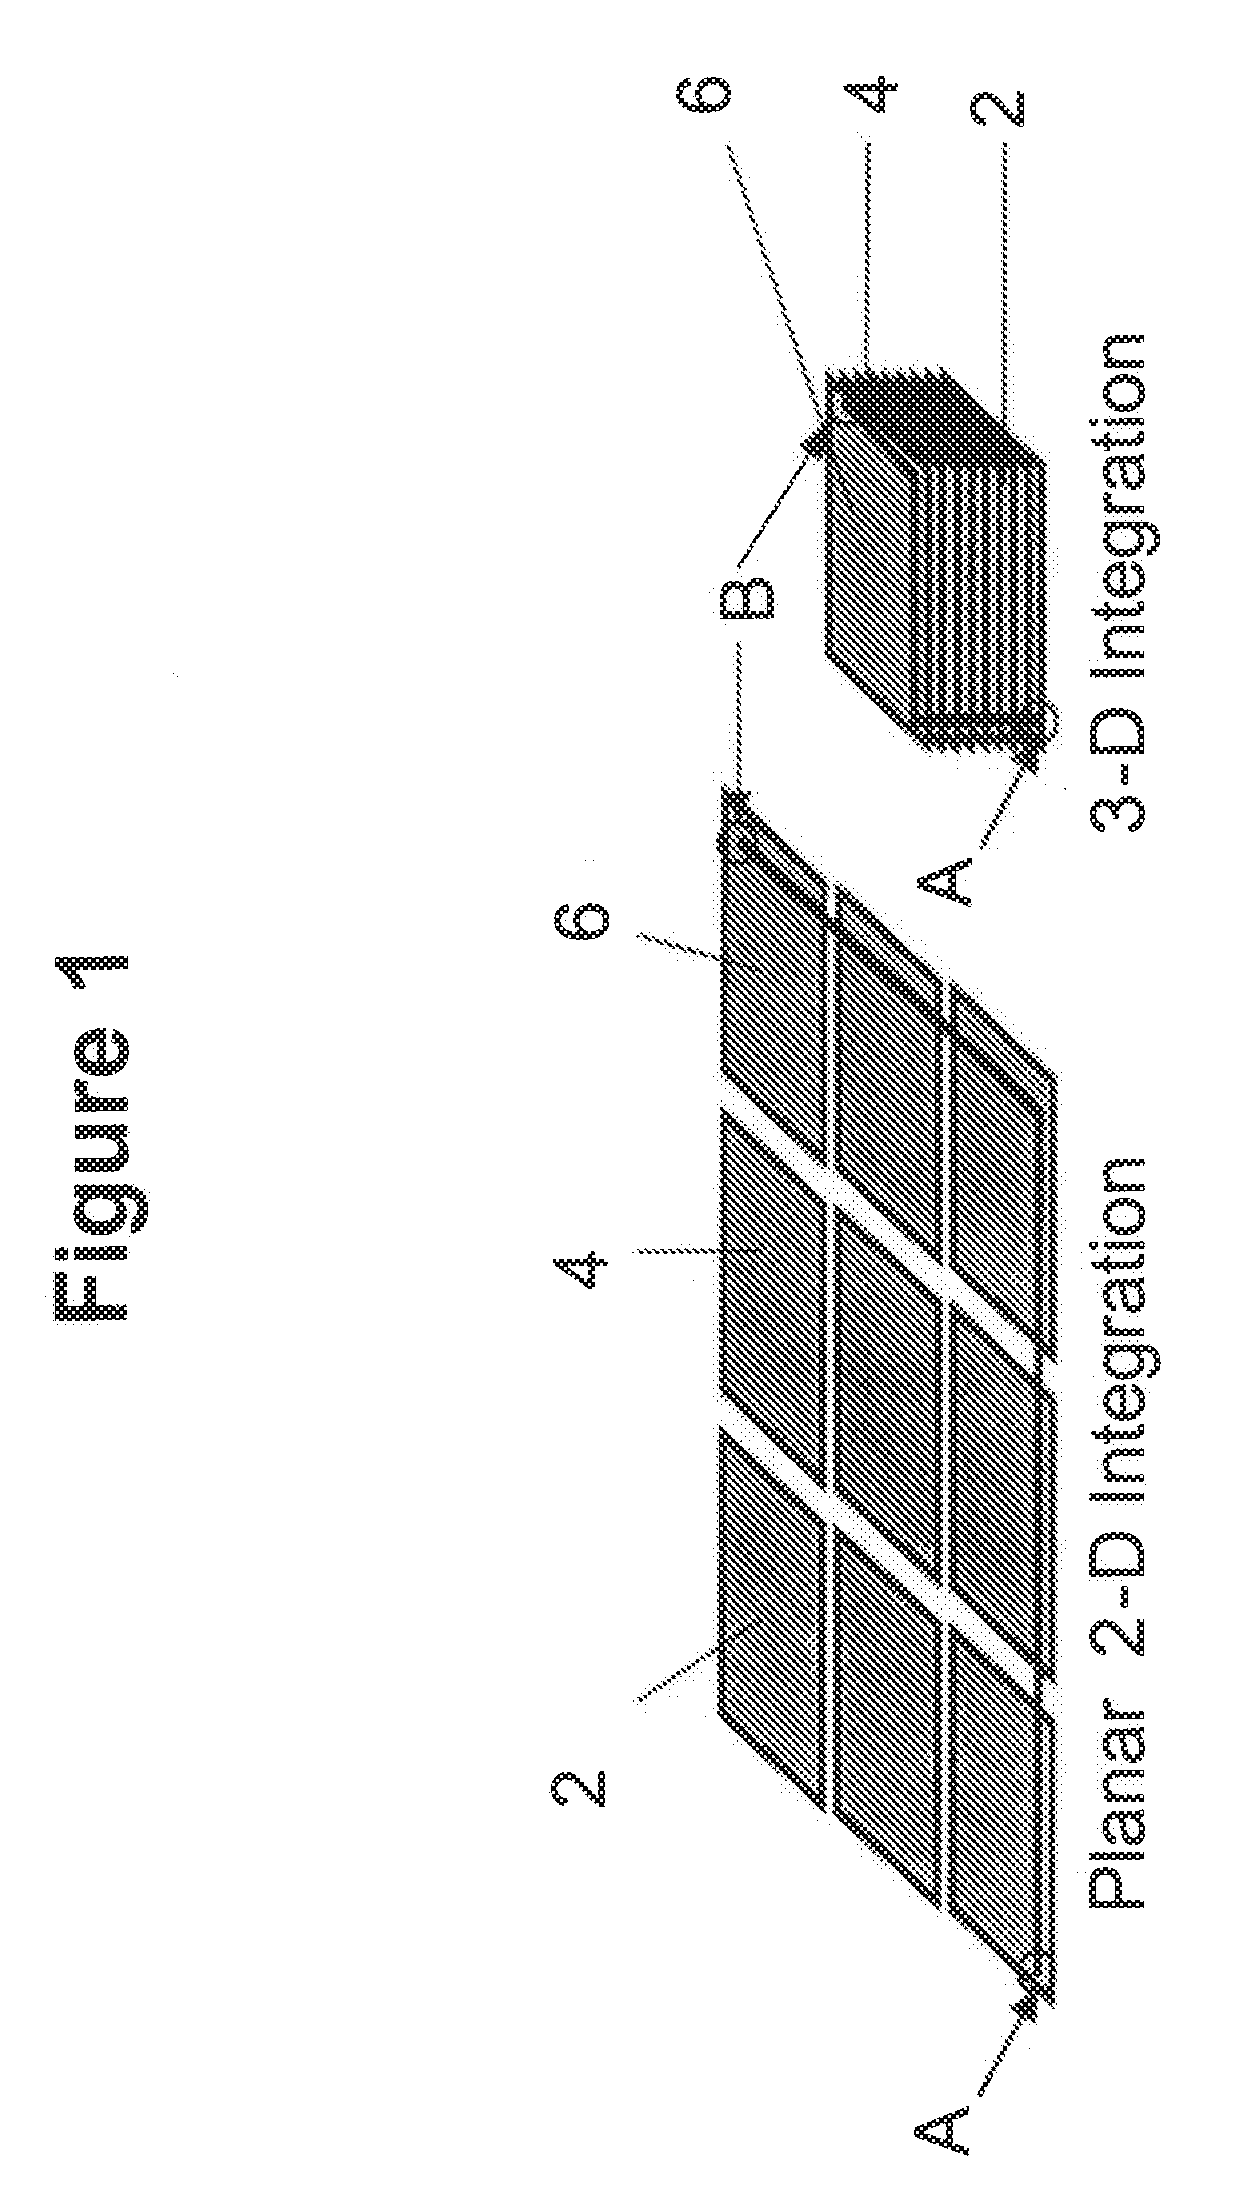 Structure and process for electrical interconnect and thermal management